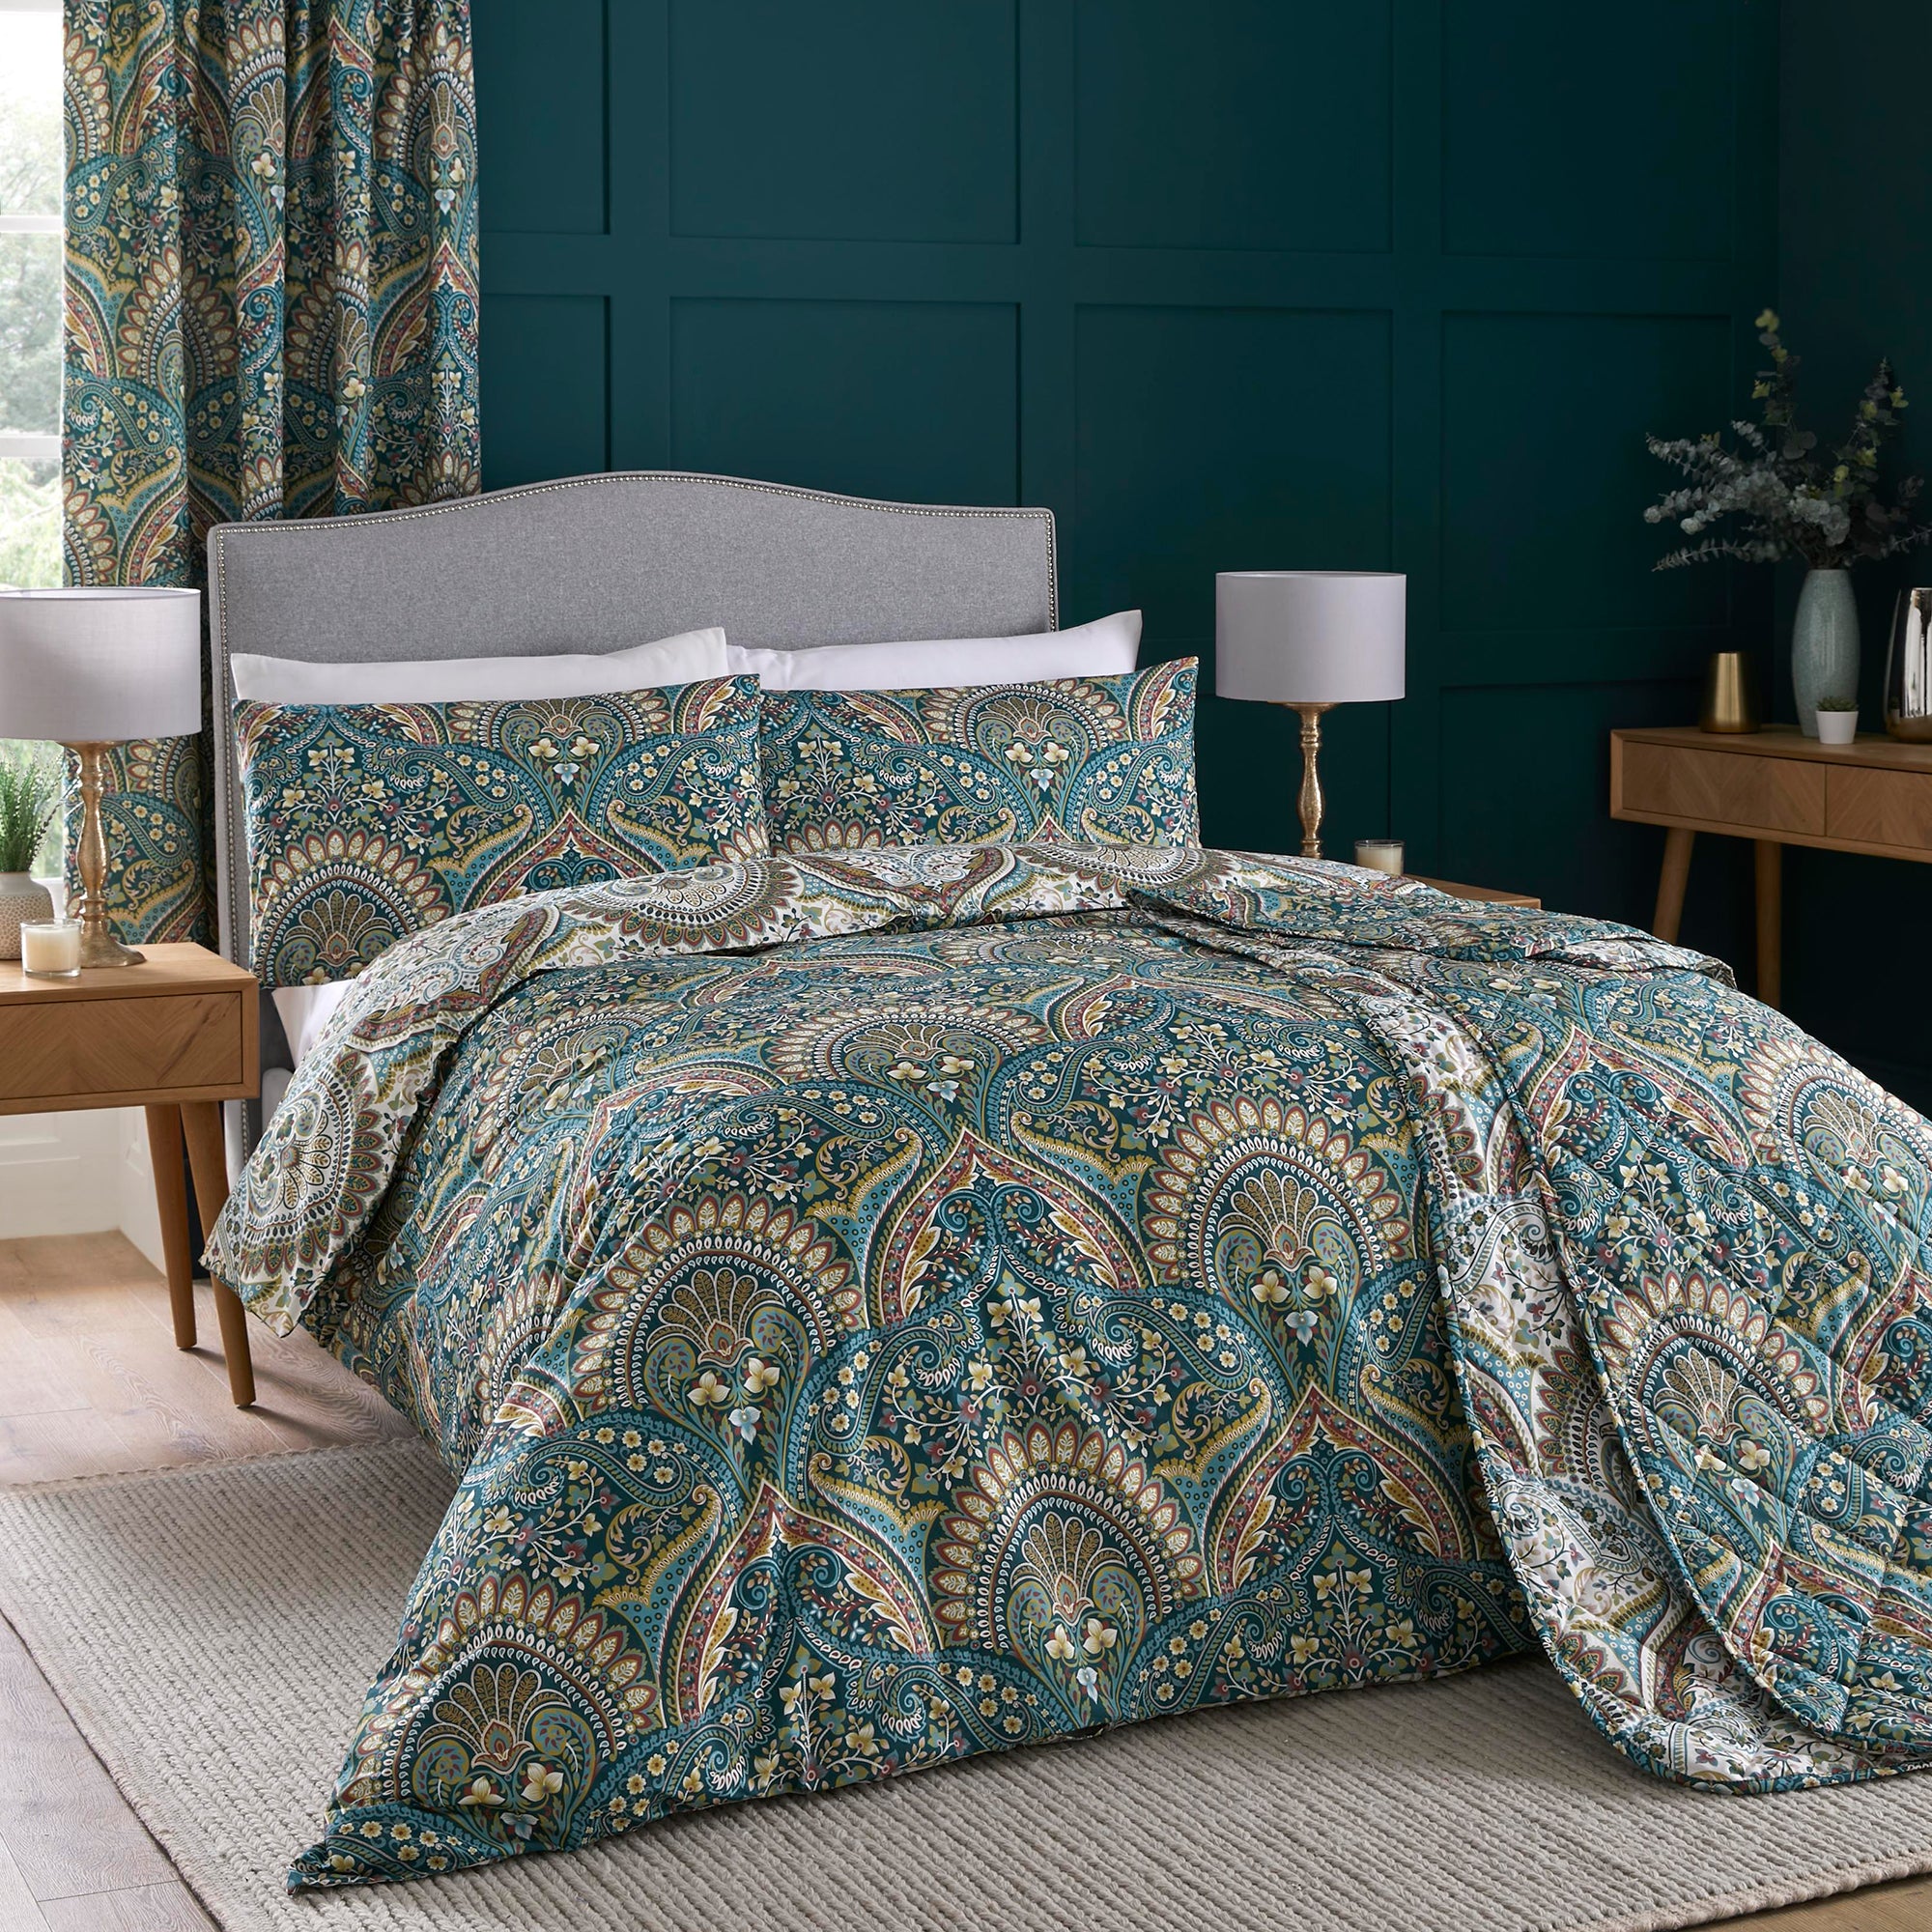 Bedspread Palais by D&D Design in Teal